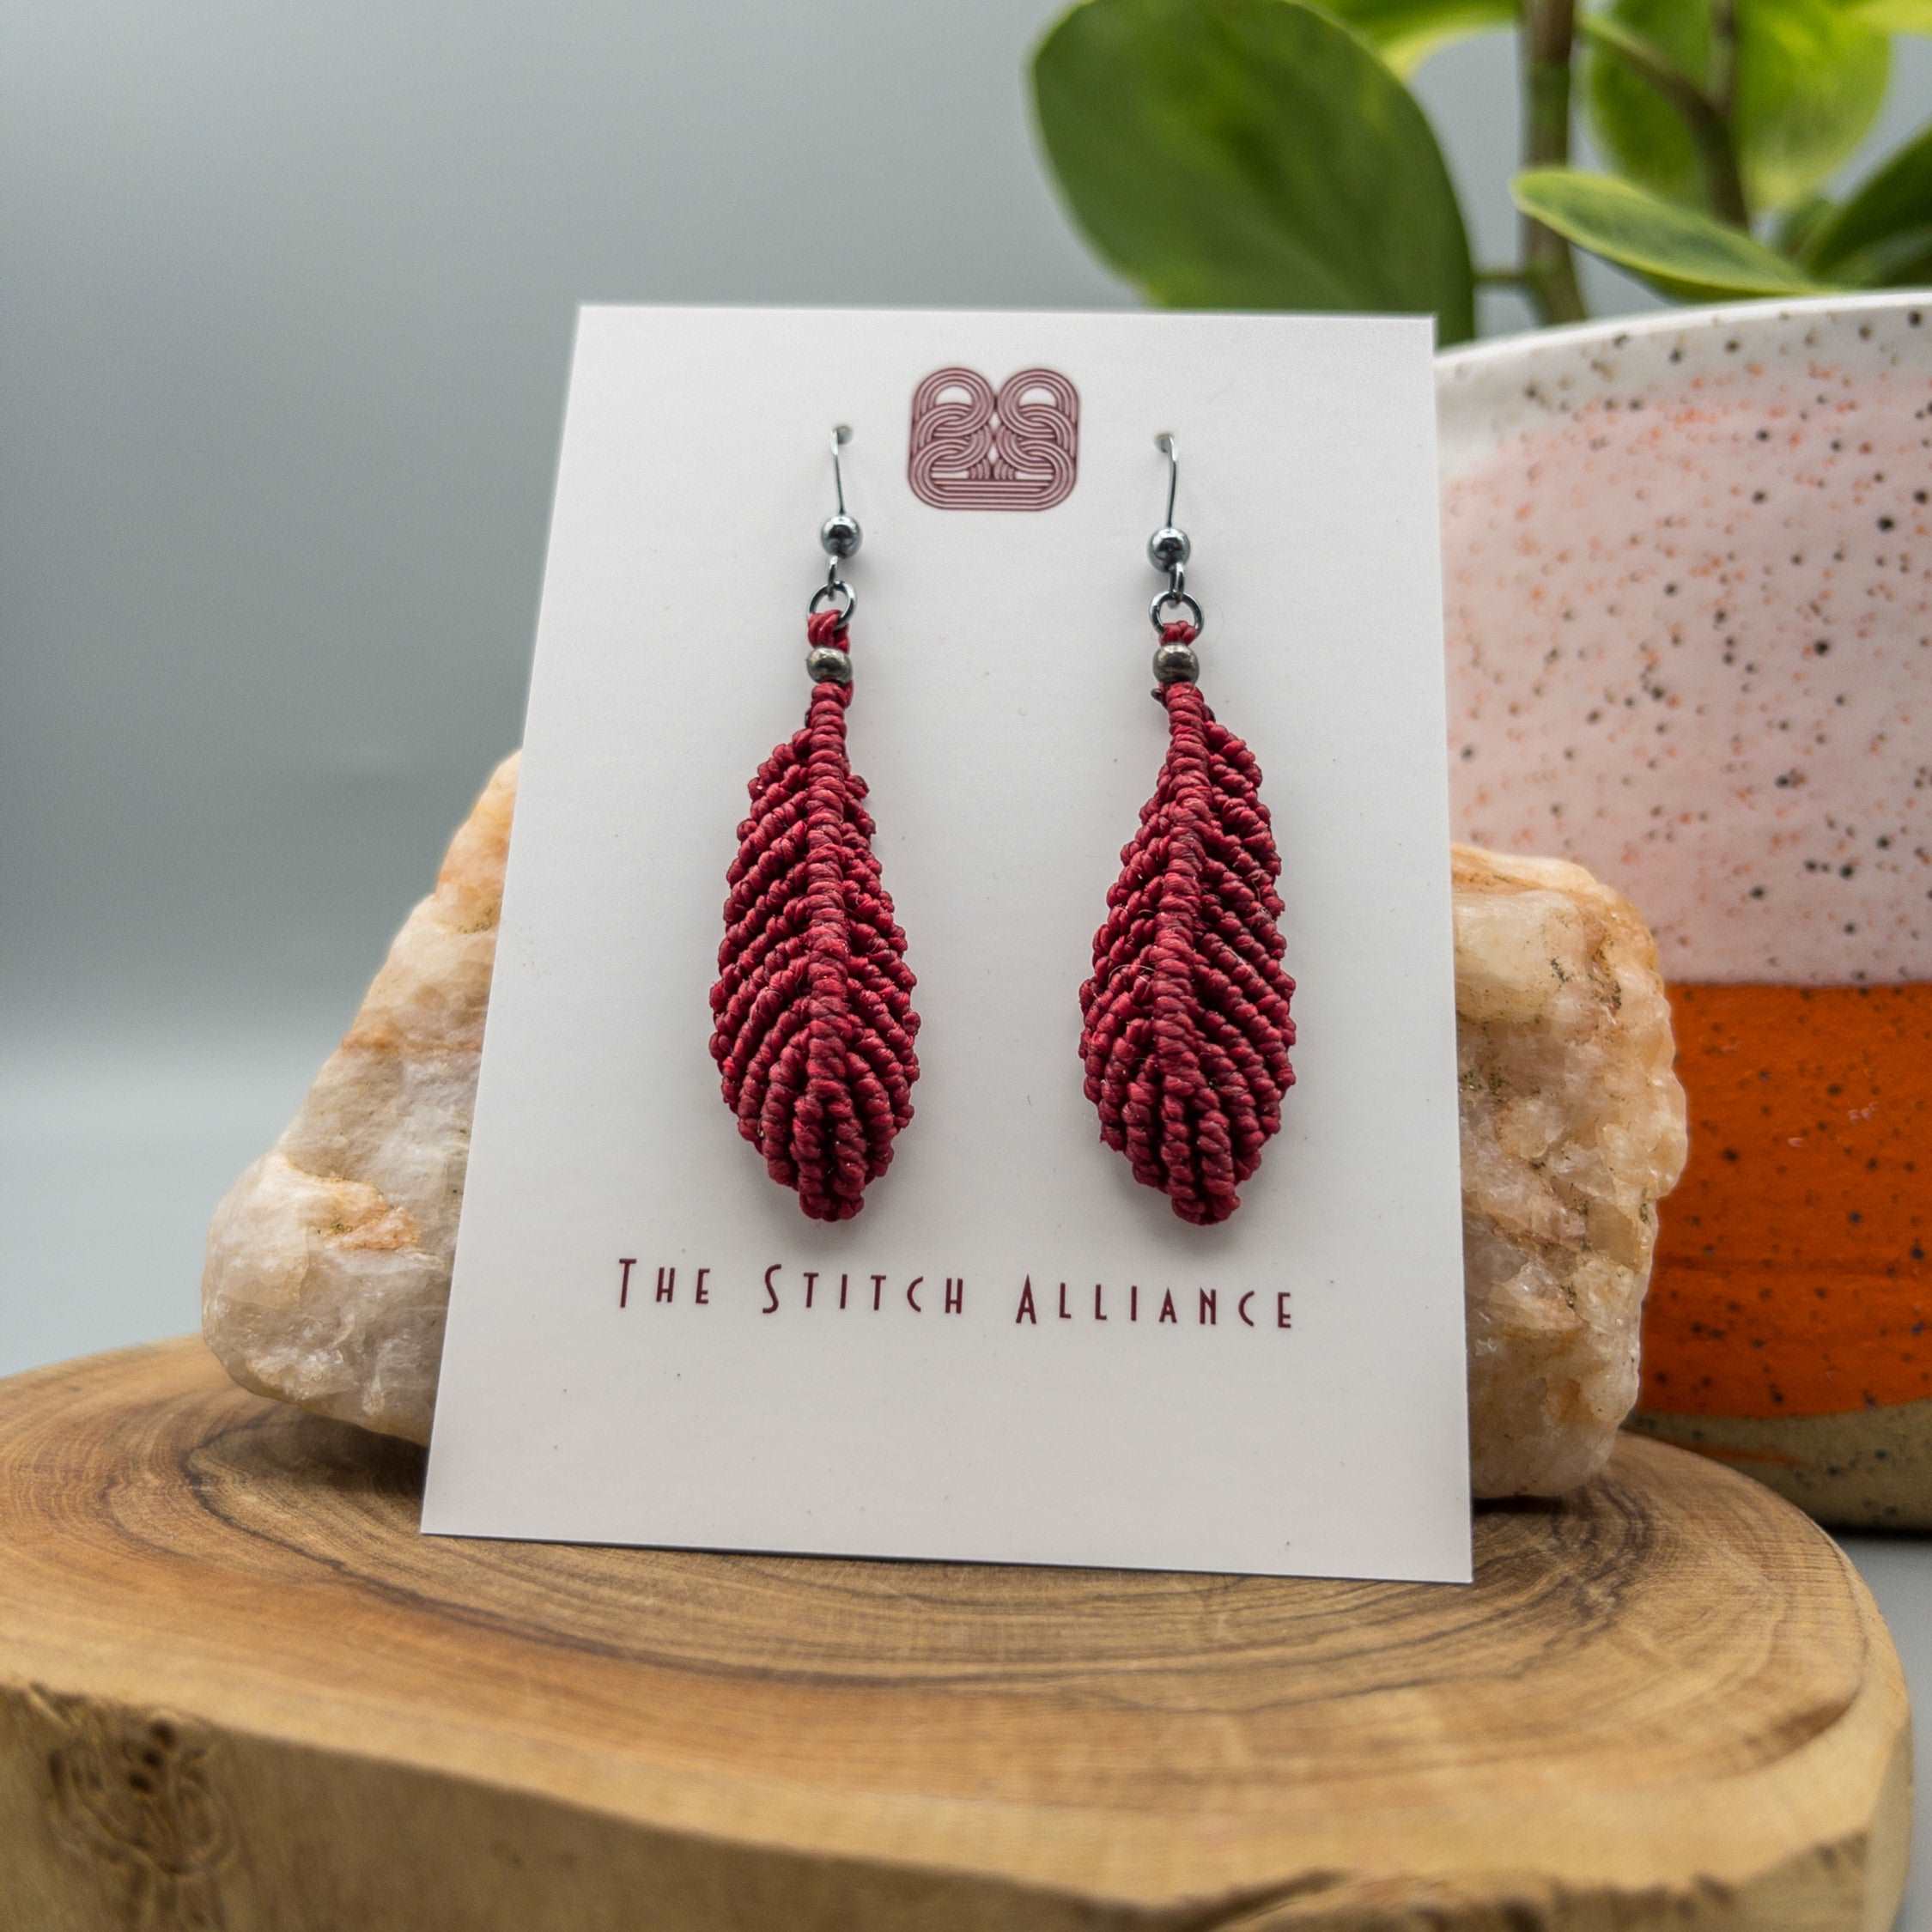 XIAOXIAOTONG Bohemian style feather tassel dangling earrings India | Ubuy